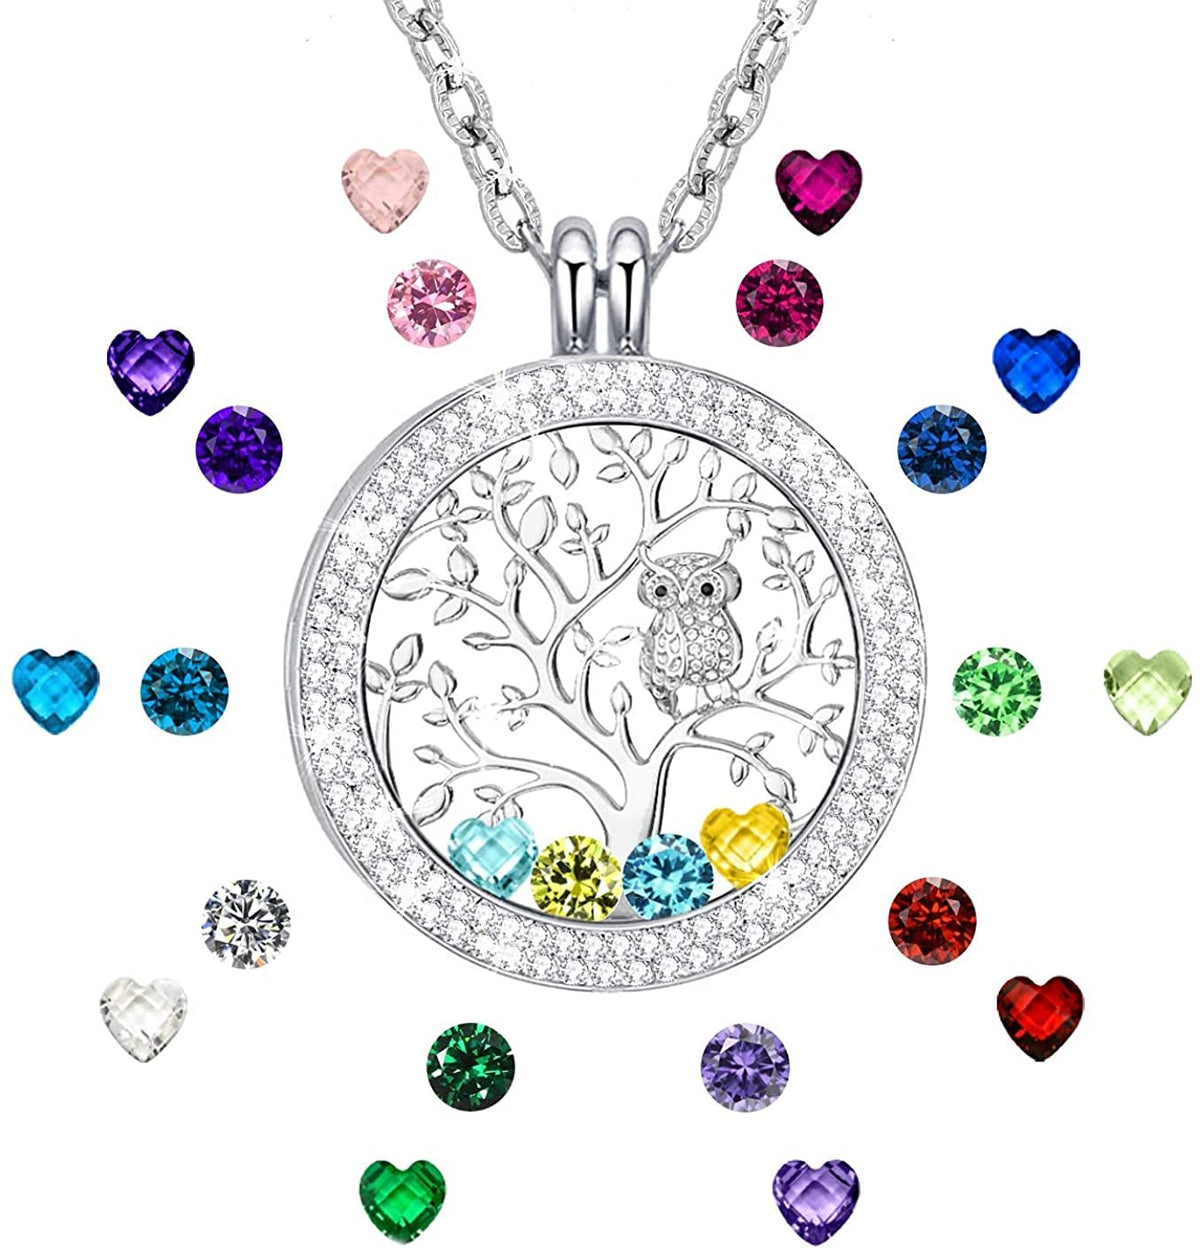 Buy PiercingJ Living Memory Floating Locket Pendant Necklace Polished Round  Stainless Steel Memorial Keepsake Glass Locket Necklace for Women, Free  12pcs Cubic Zirconia Birthstone at Amazon.in